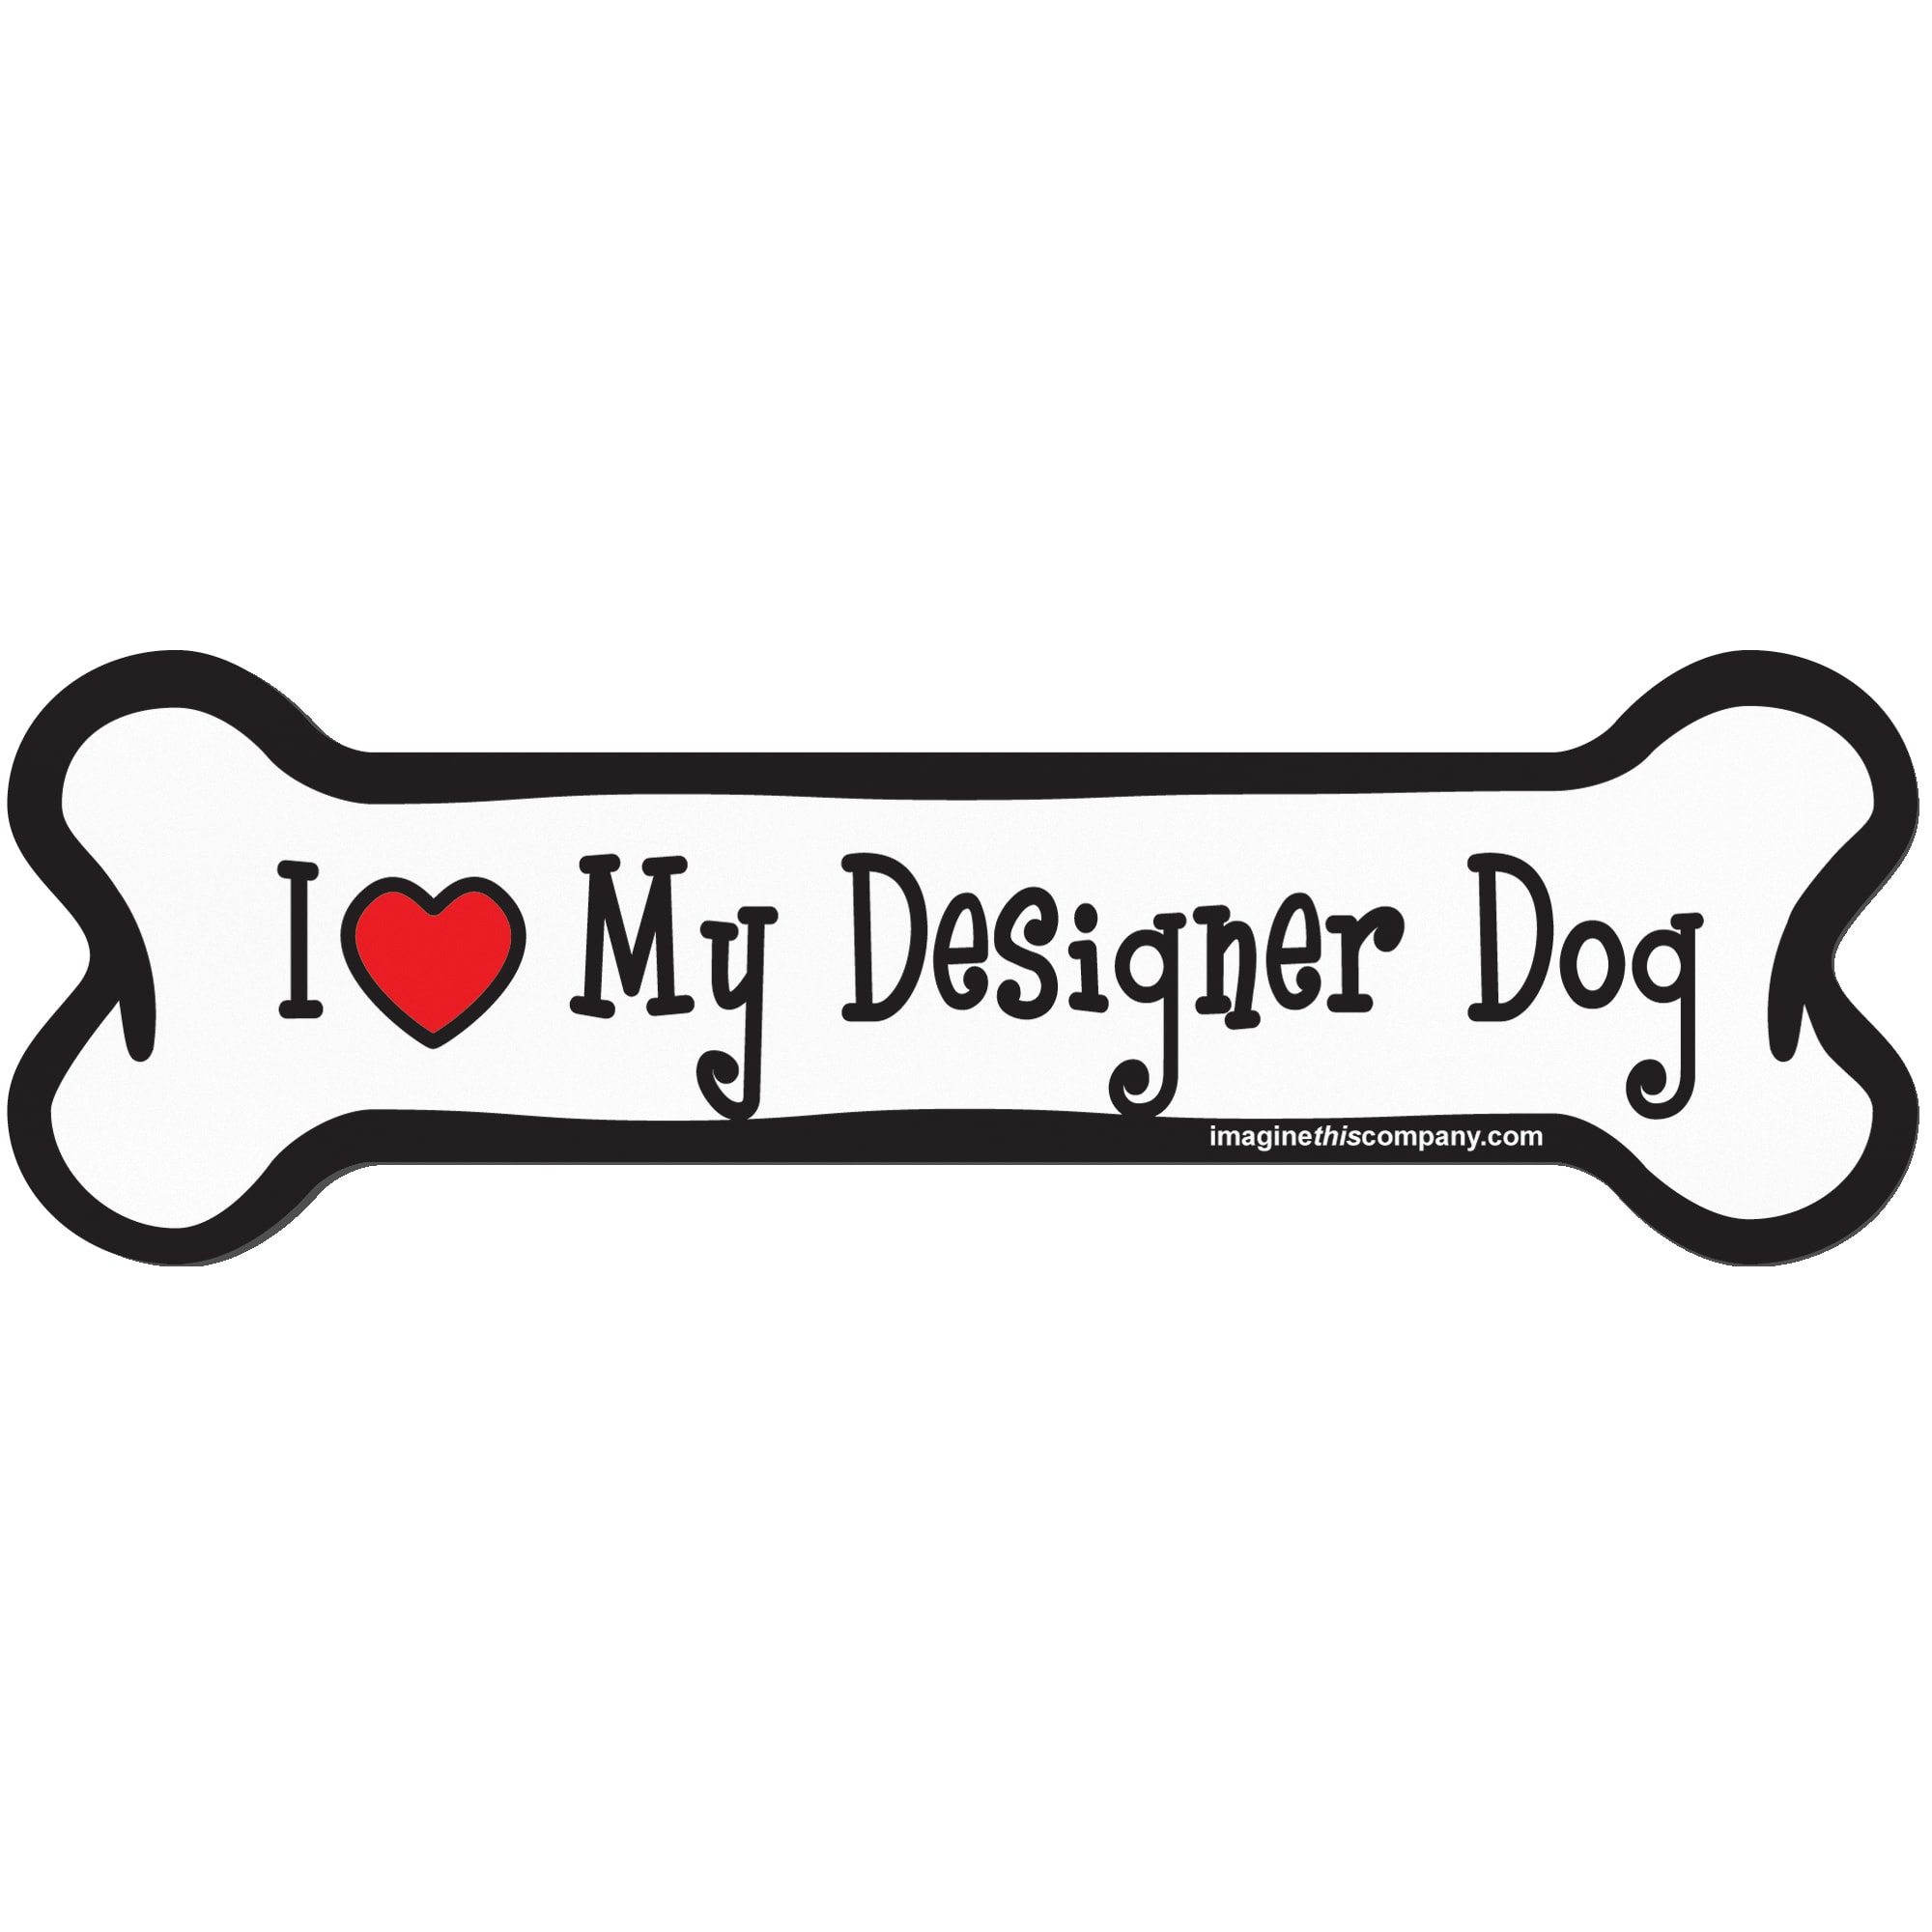 Imagine This Bone Car Magnet I Love My Collie 2-Inch by 7-Inch